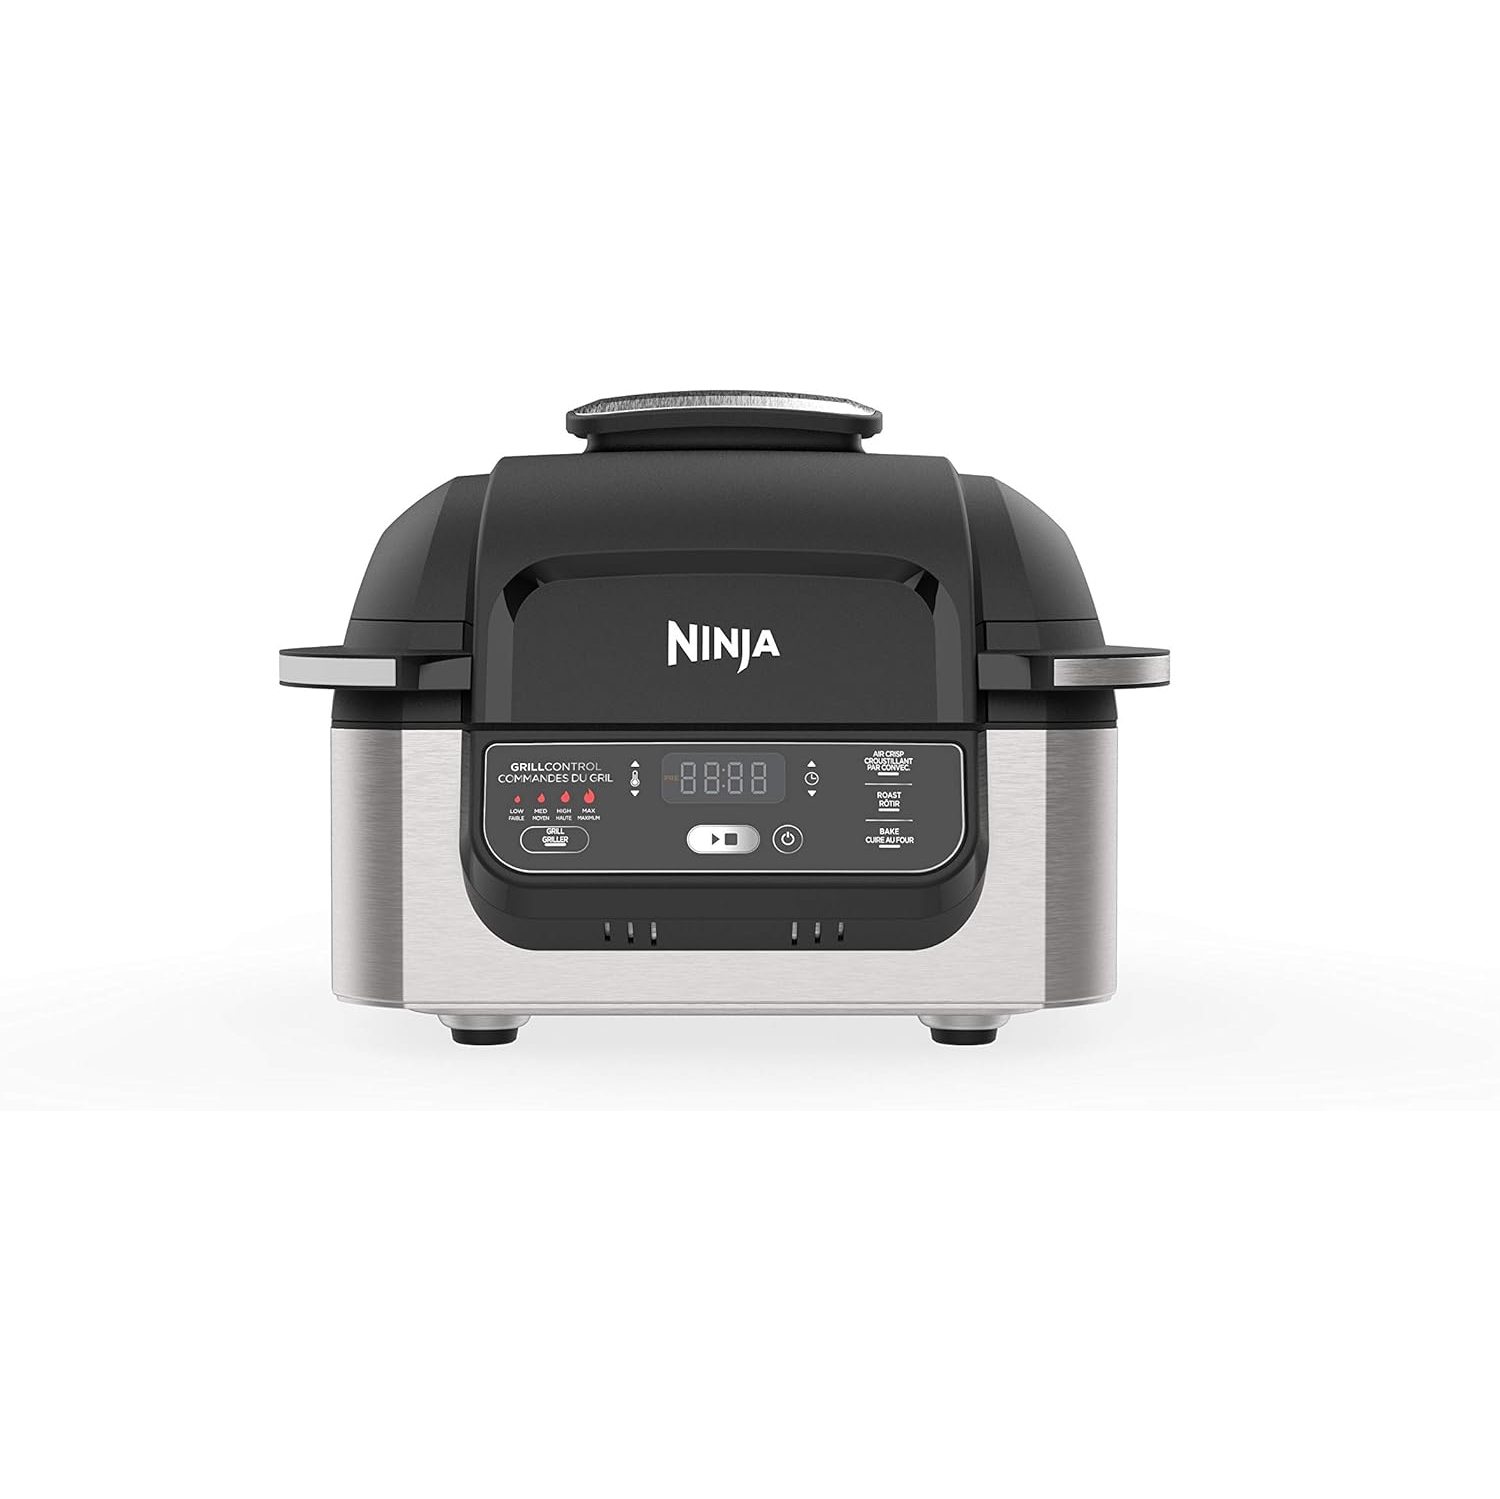 Open Box - Ninja - Foodi 5-in-1 Indoor Grill with 4-qt Air Fryer, Roast, Bake, and Cyclonic Grilling Technology